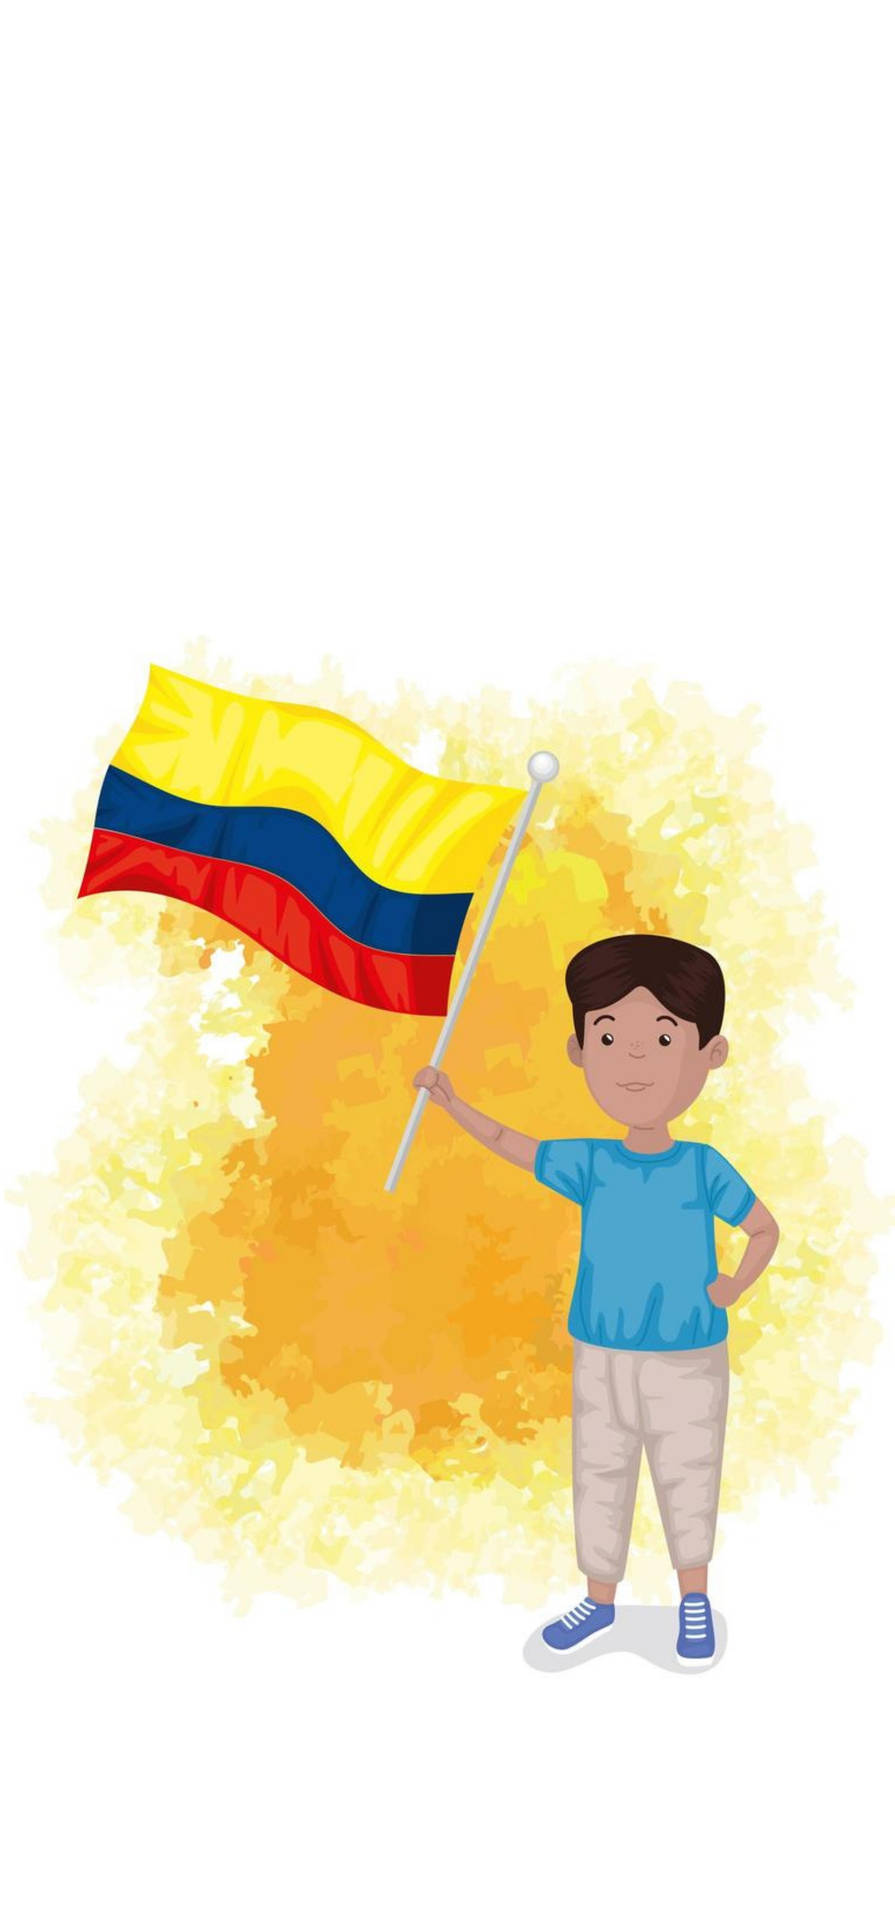 Colombia Flag Graphic Background